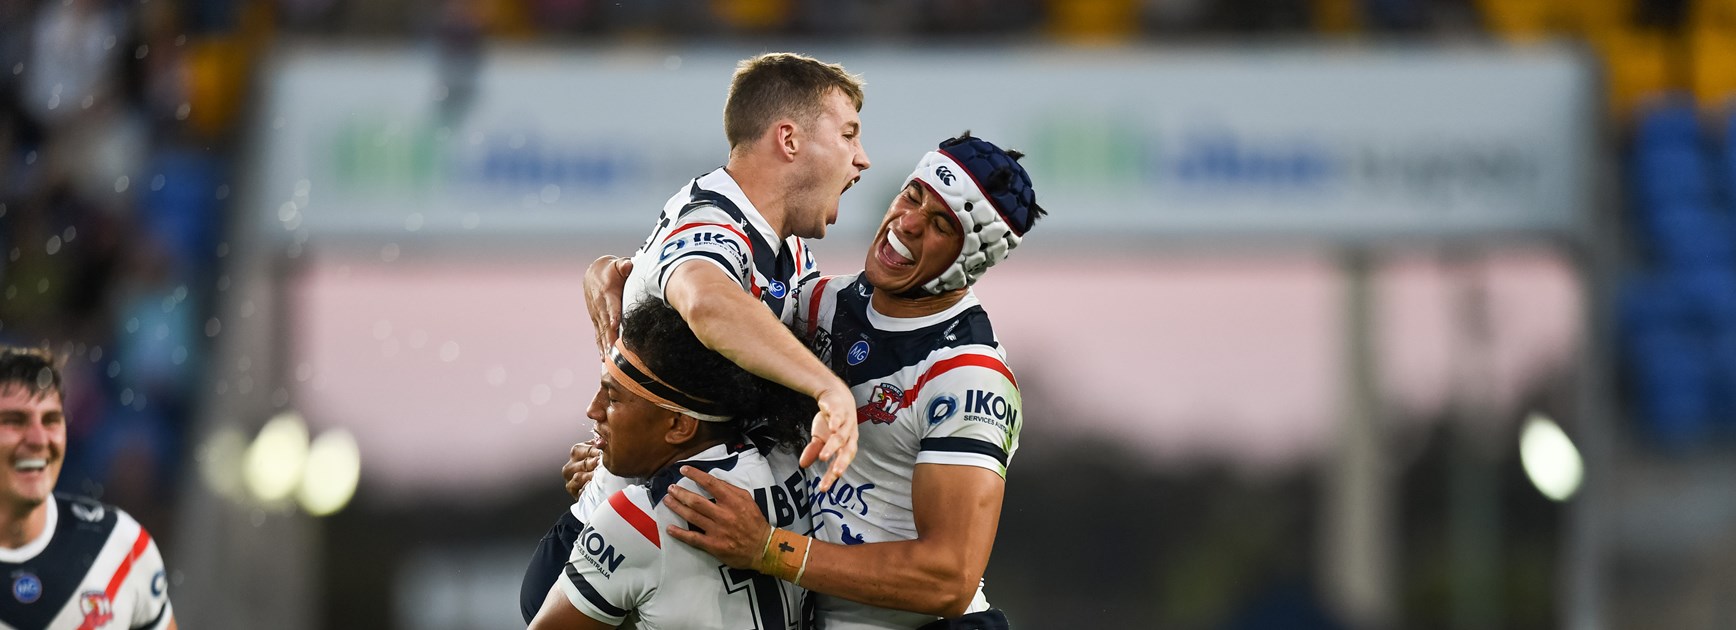 Waerea-Hargreaves Leads Roosters to Thrilling Win as Walker Ices Field Goal